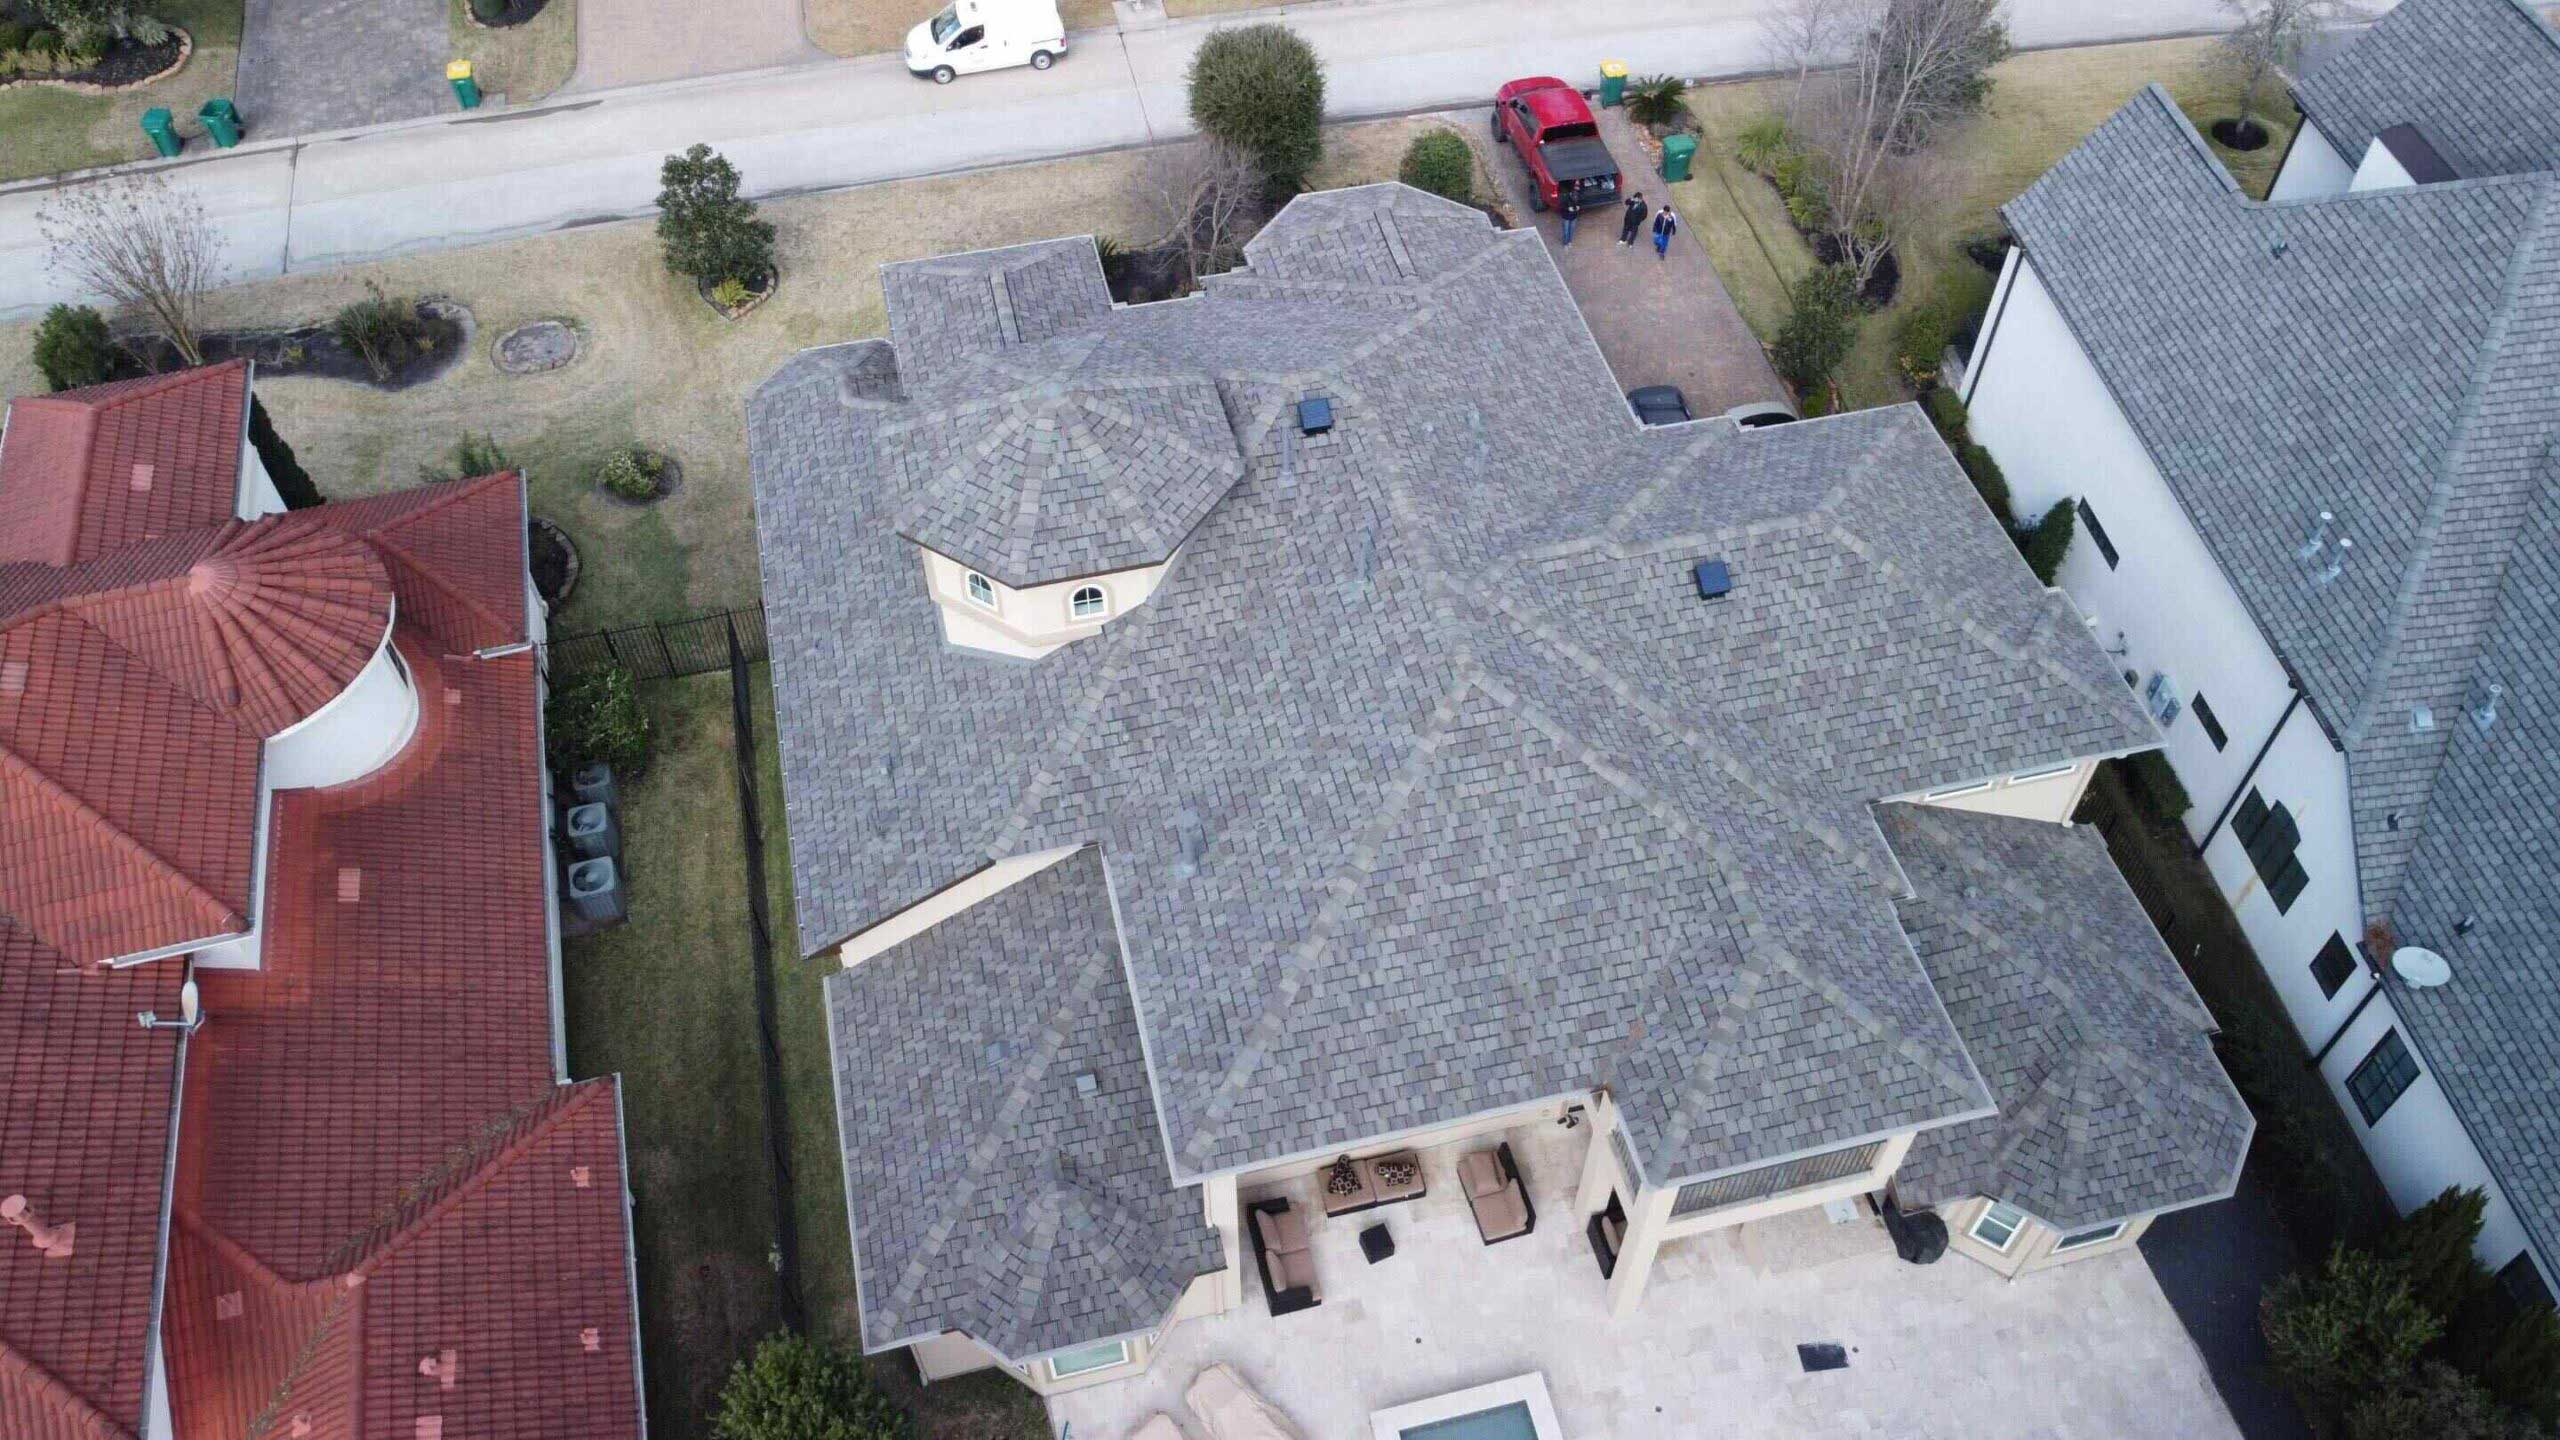 A wind storm had severely damaged the roof on this home.